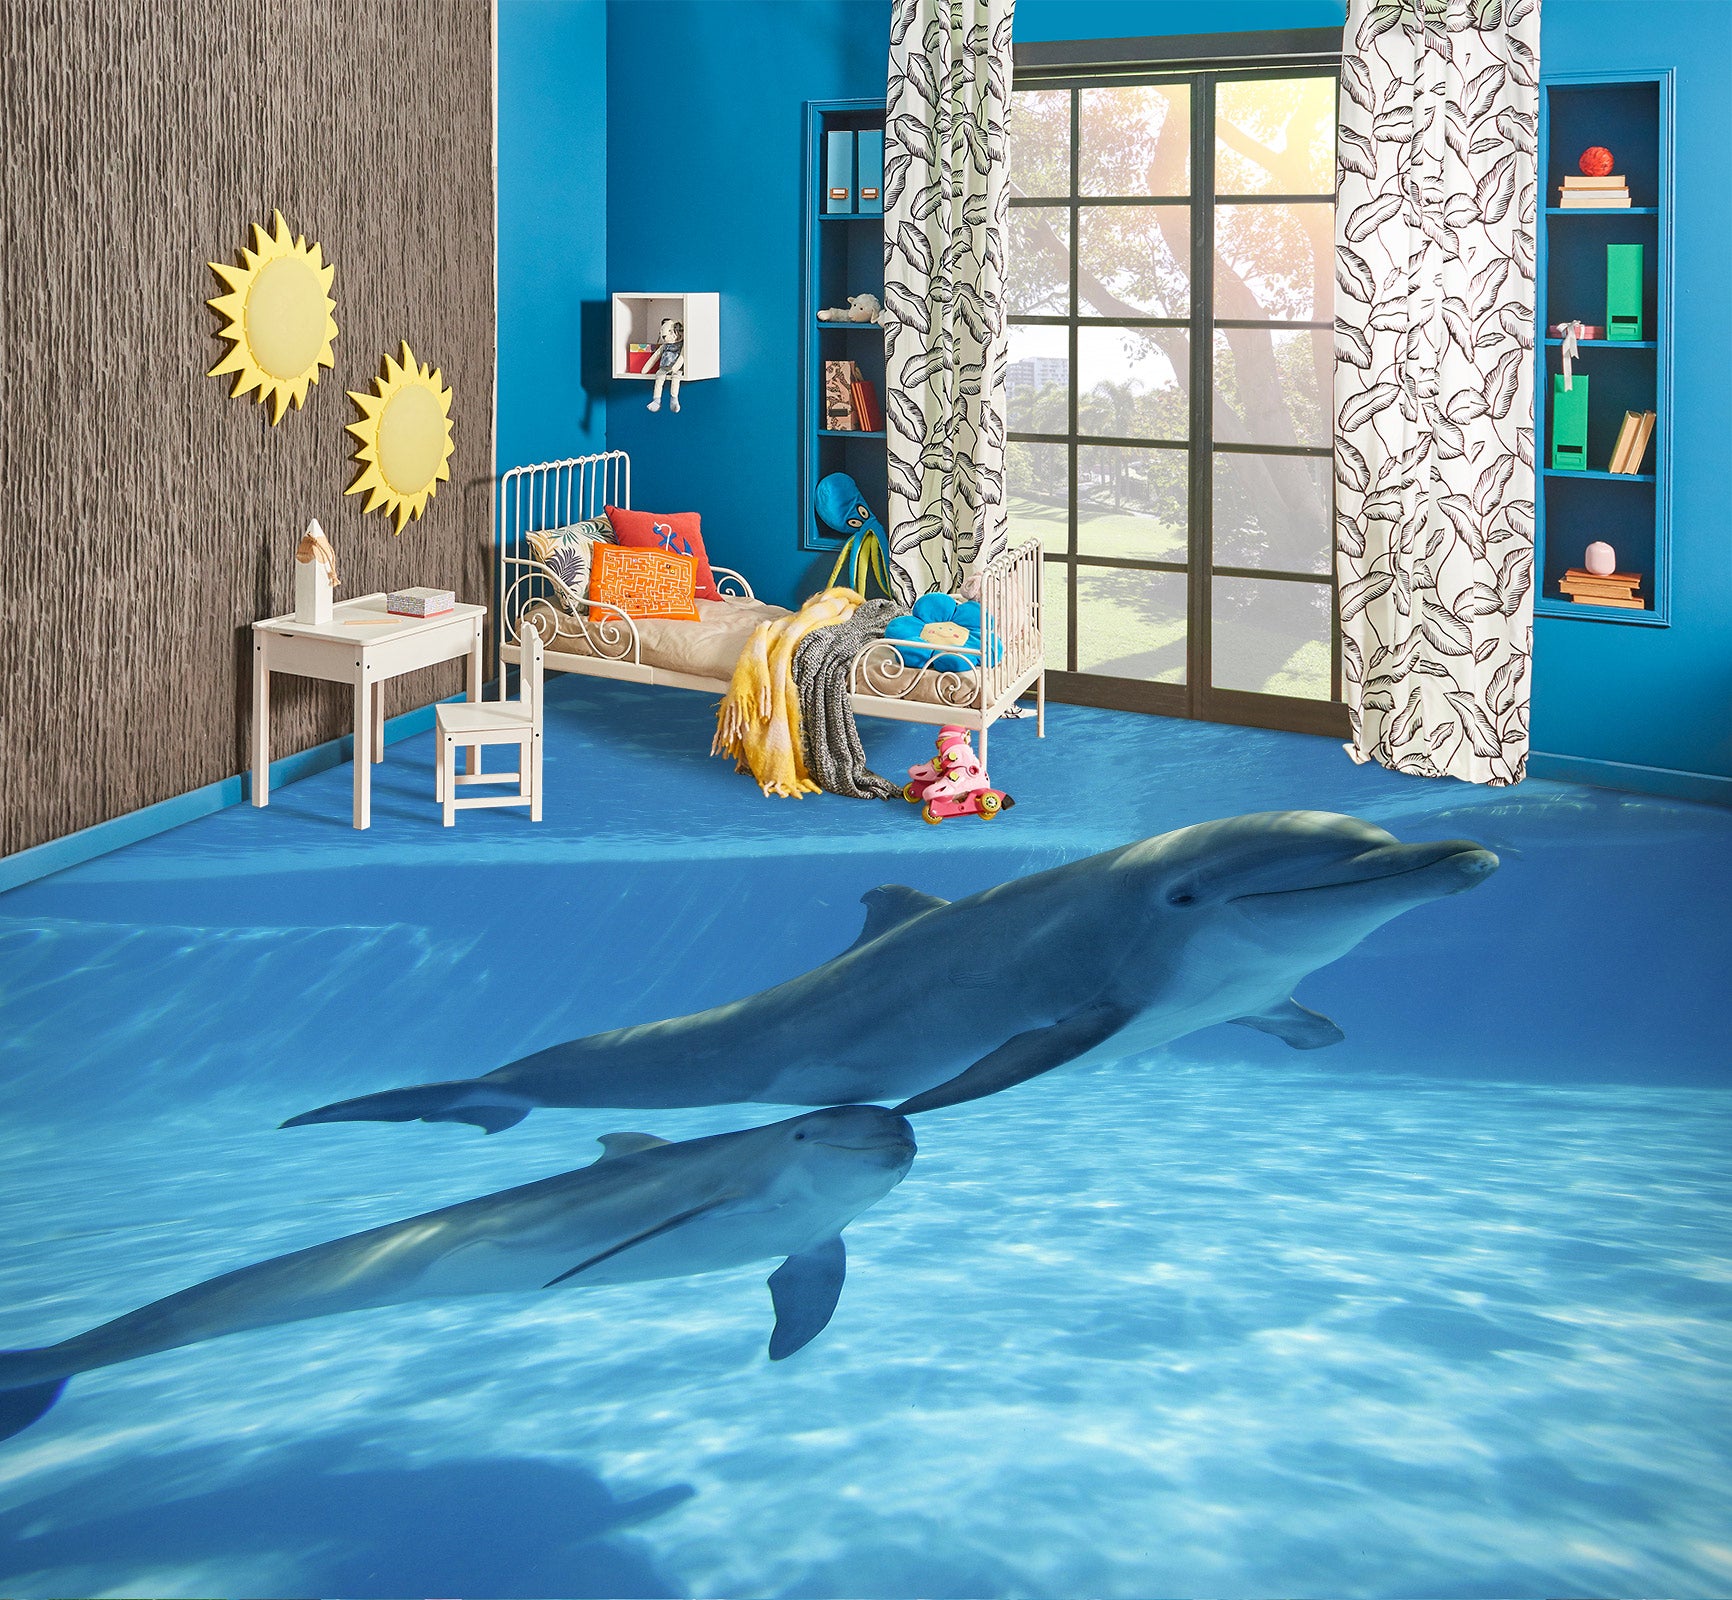 3D Graceful Dolphins 1335 Floor Mural  Wallpaper Murals Self-Adhesive Removable Print Epoxy